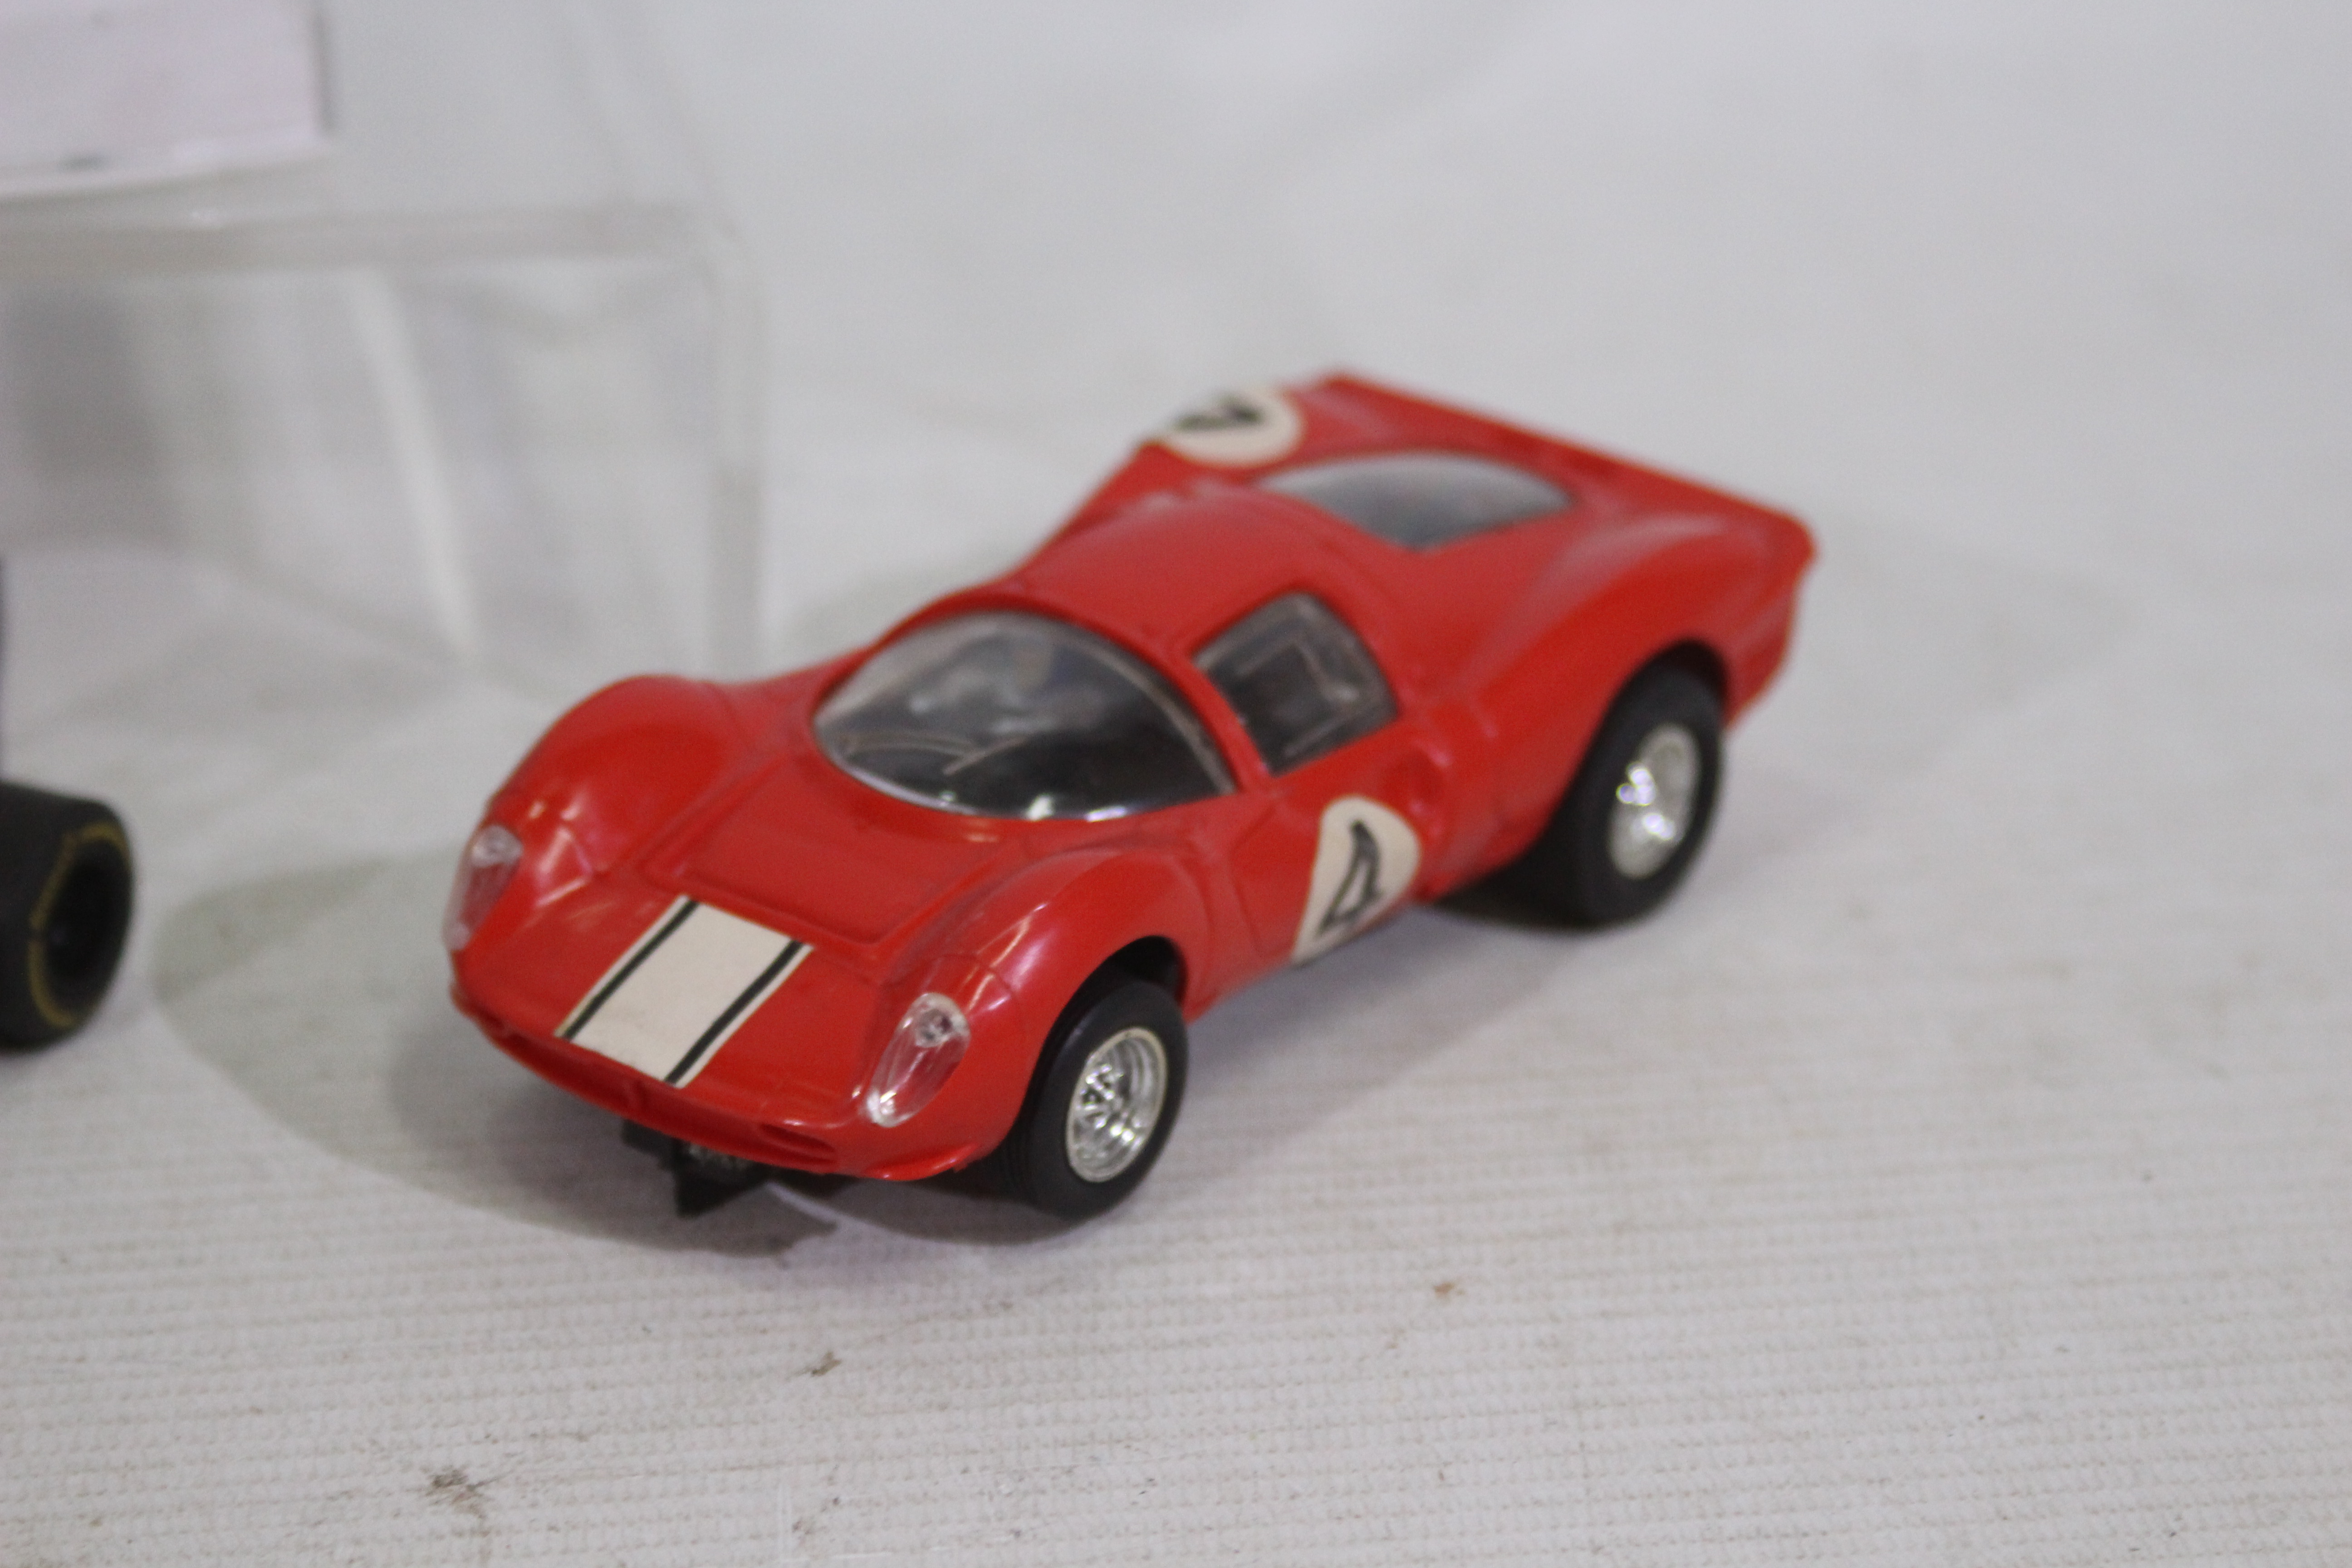 Scalextric - 4 x slot cars, a Dodge Challenger in an unmarked box, a Ferrari P4, - Image 3 of 5